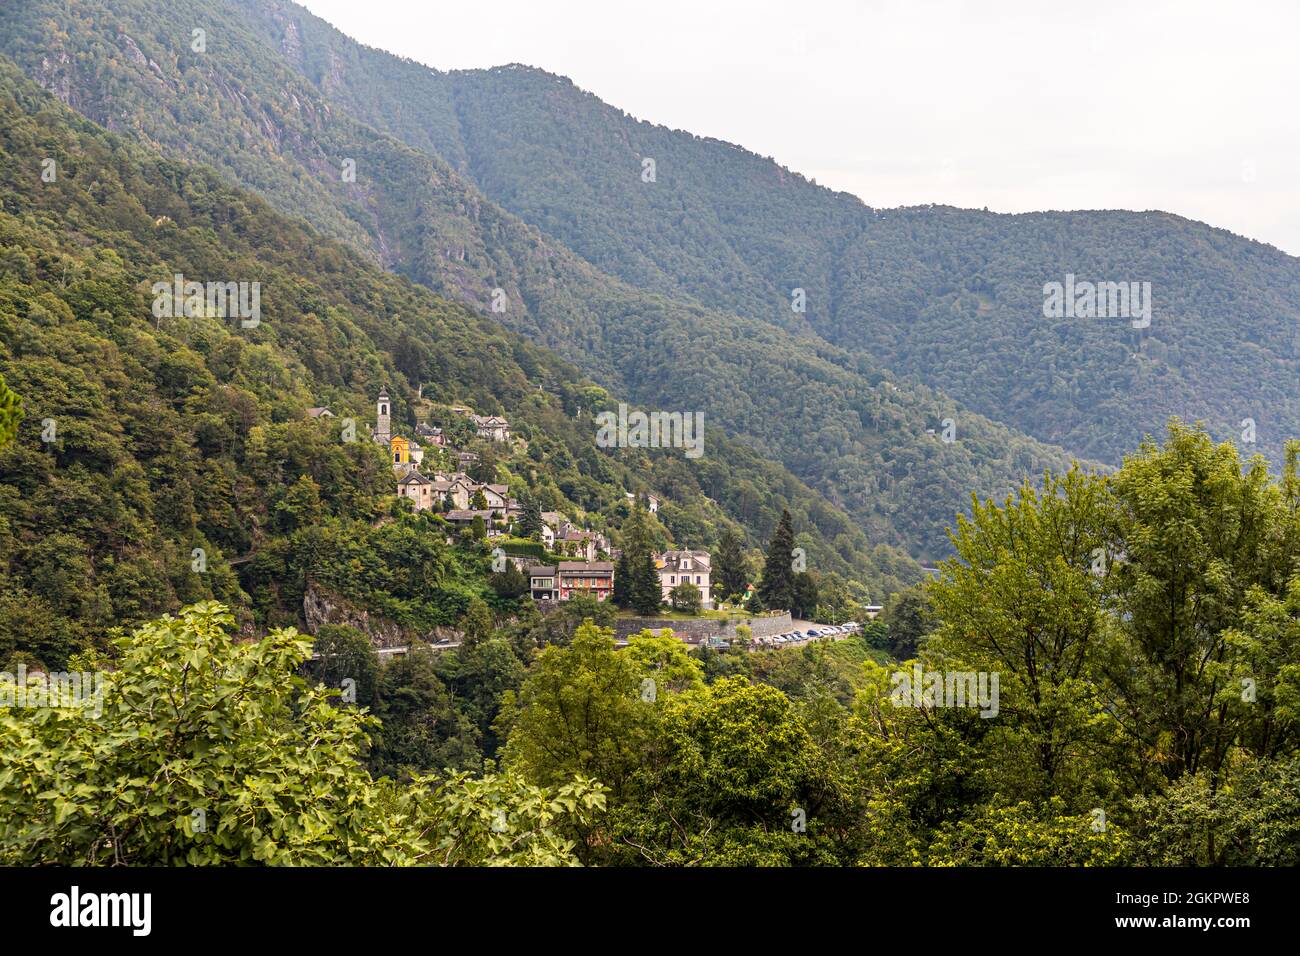 The villages in the Onsernone Valley have always harnessed the power of the water that rages down the steep slopes. In the 17th century there were twenty mills in the valley Circolo d'Onsernone, Switzerland Stock Photo